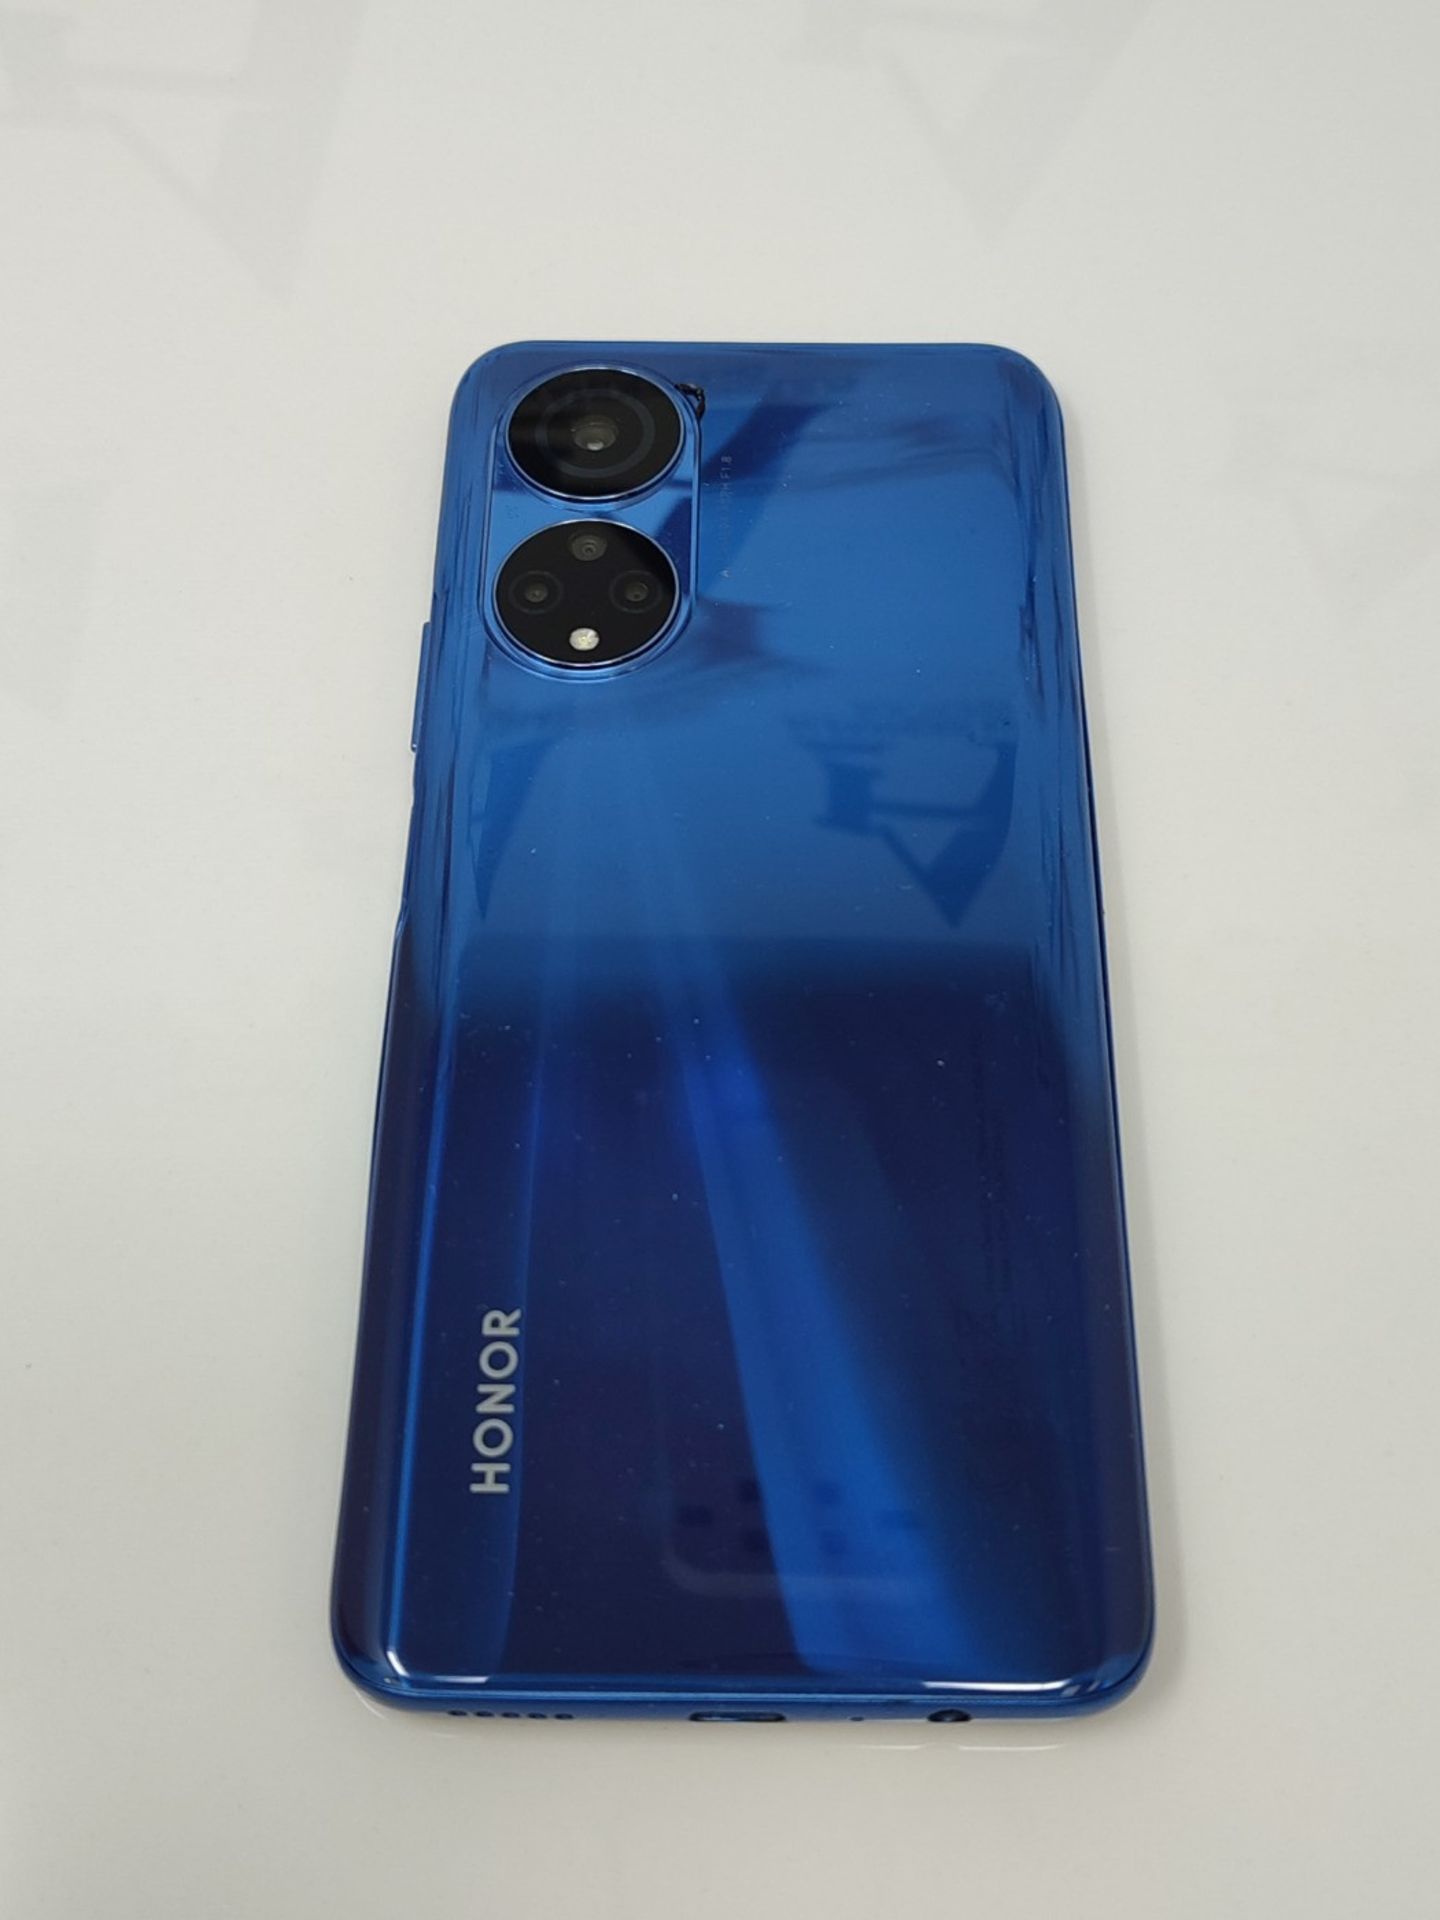 RRP £160.00 HONOR X7 Smartphone Android 11, 4GB RAM + 128GB Storage, 6.47 FullView Screen with - Image 3 of 3